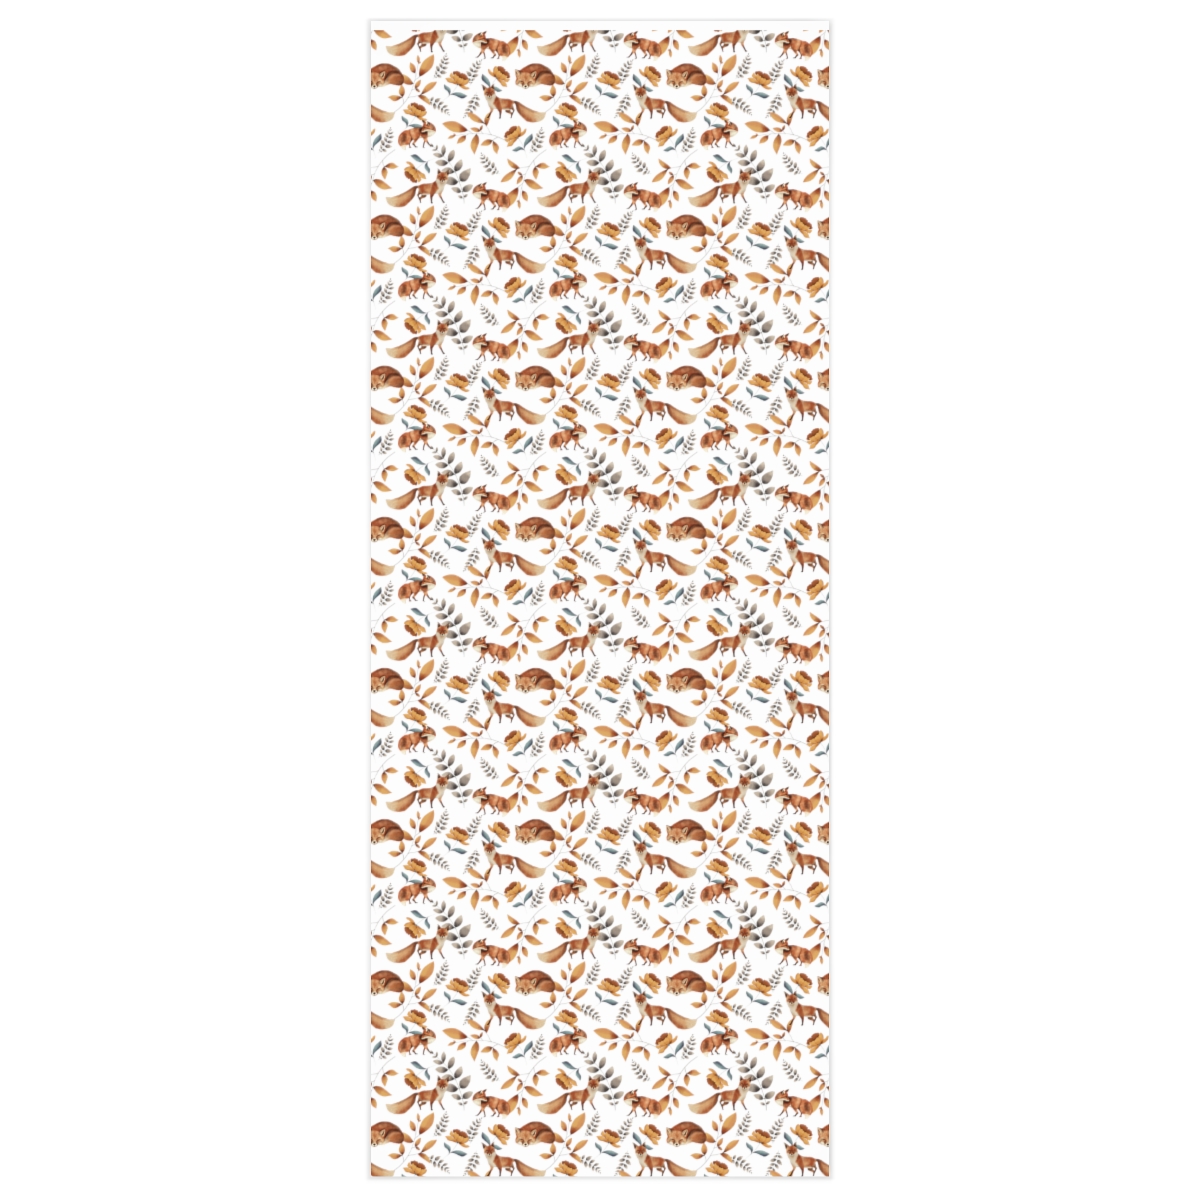 Fox Wrapping Paper, Woodland Scene Gift Wrap, Earthy Wrapping Paper, Sweet  Fox Gift Wrap, Christmas Illustrated Fine Wrapping Paper 